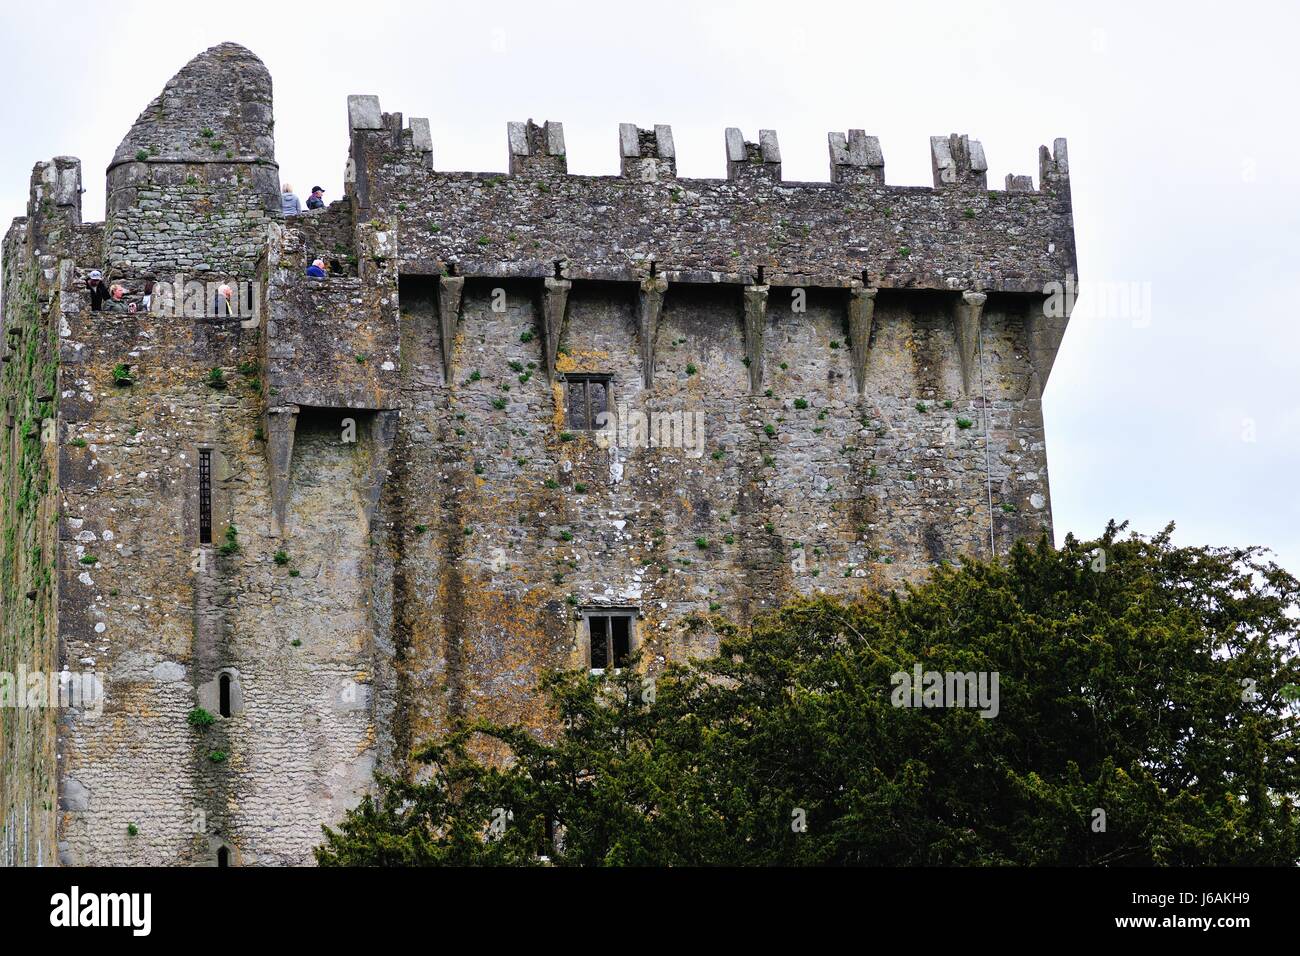 Battlements and parapet of Blarney Castle in Blarney, County Cork, Ireland. The castle was built in 1446 by Dermot McCarthy. Stock Photo